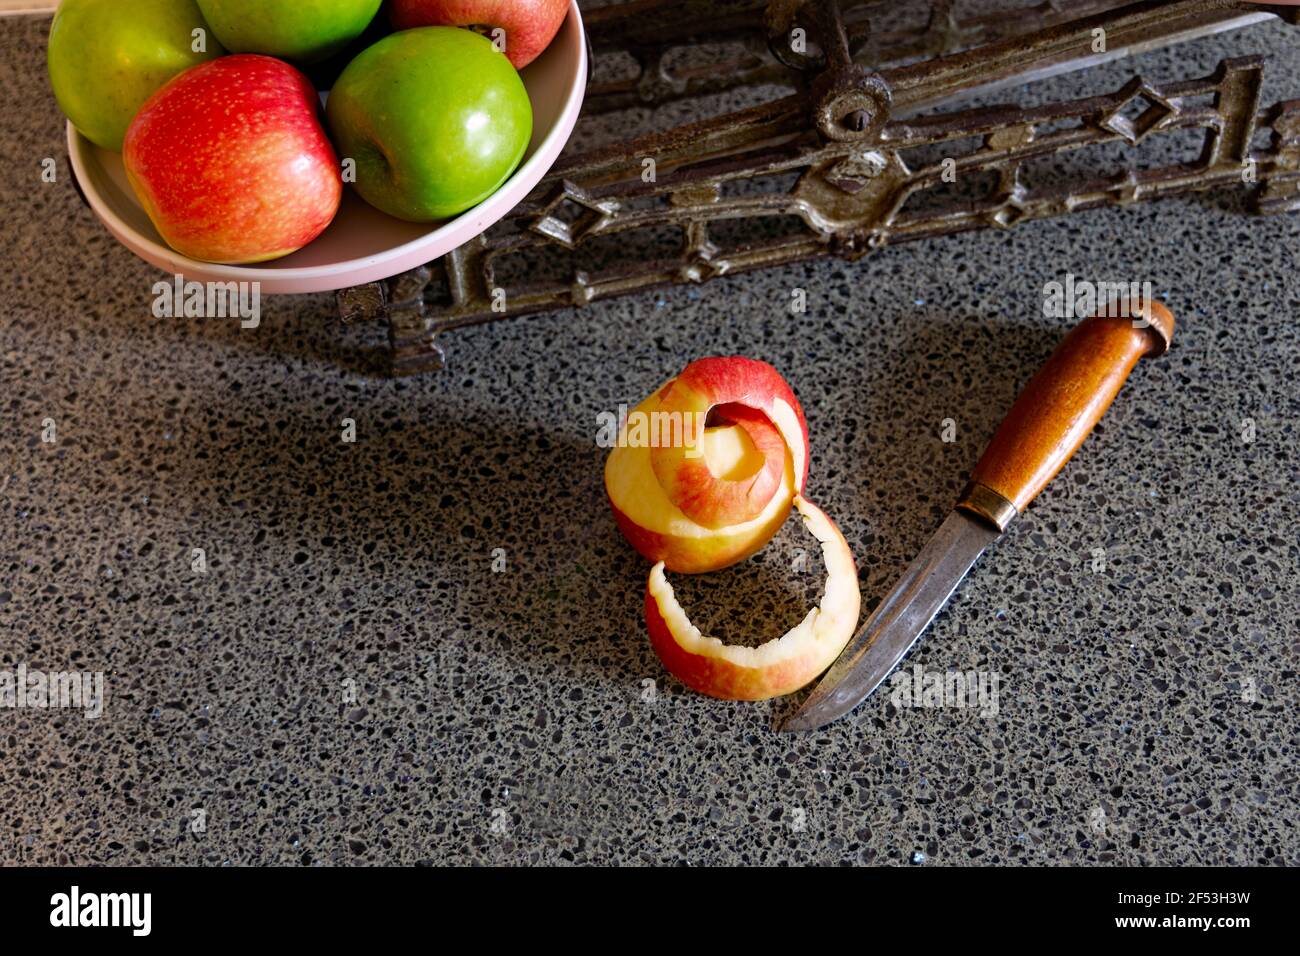 A half peeled apple and a small knife on a kitchen bench with a vintage set of scales and red and green apples. Stock Photo